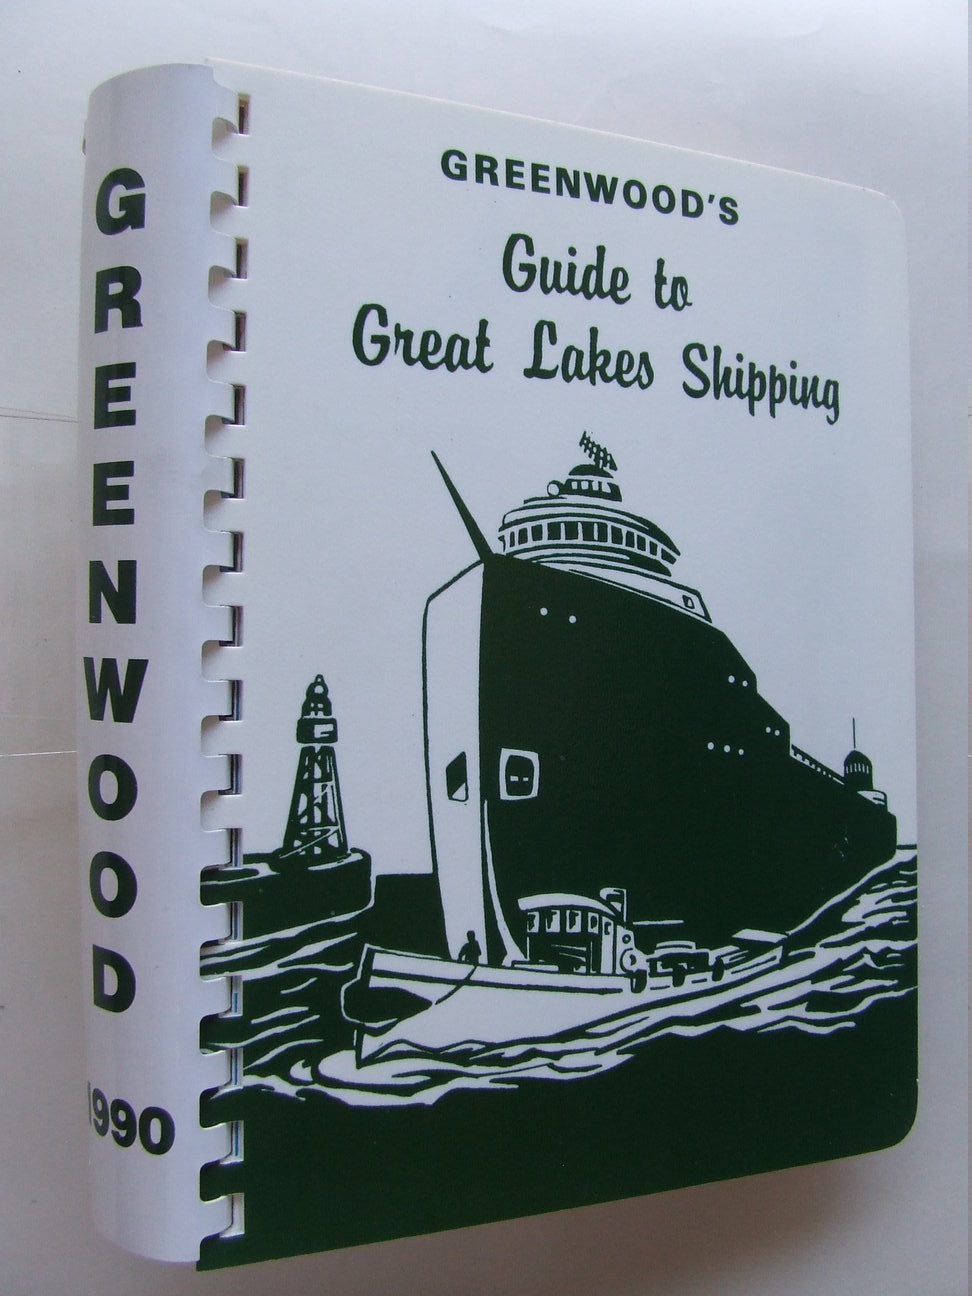 Greenwood's Guide to Great Lakes Shipping